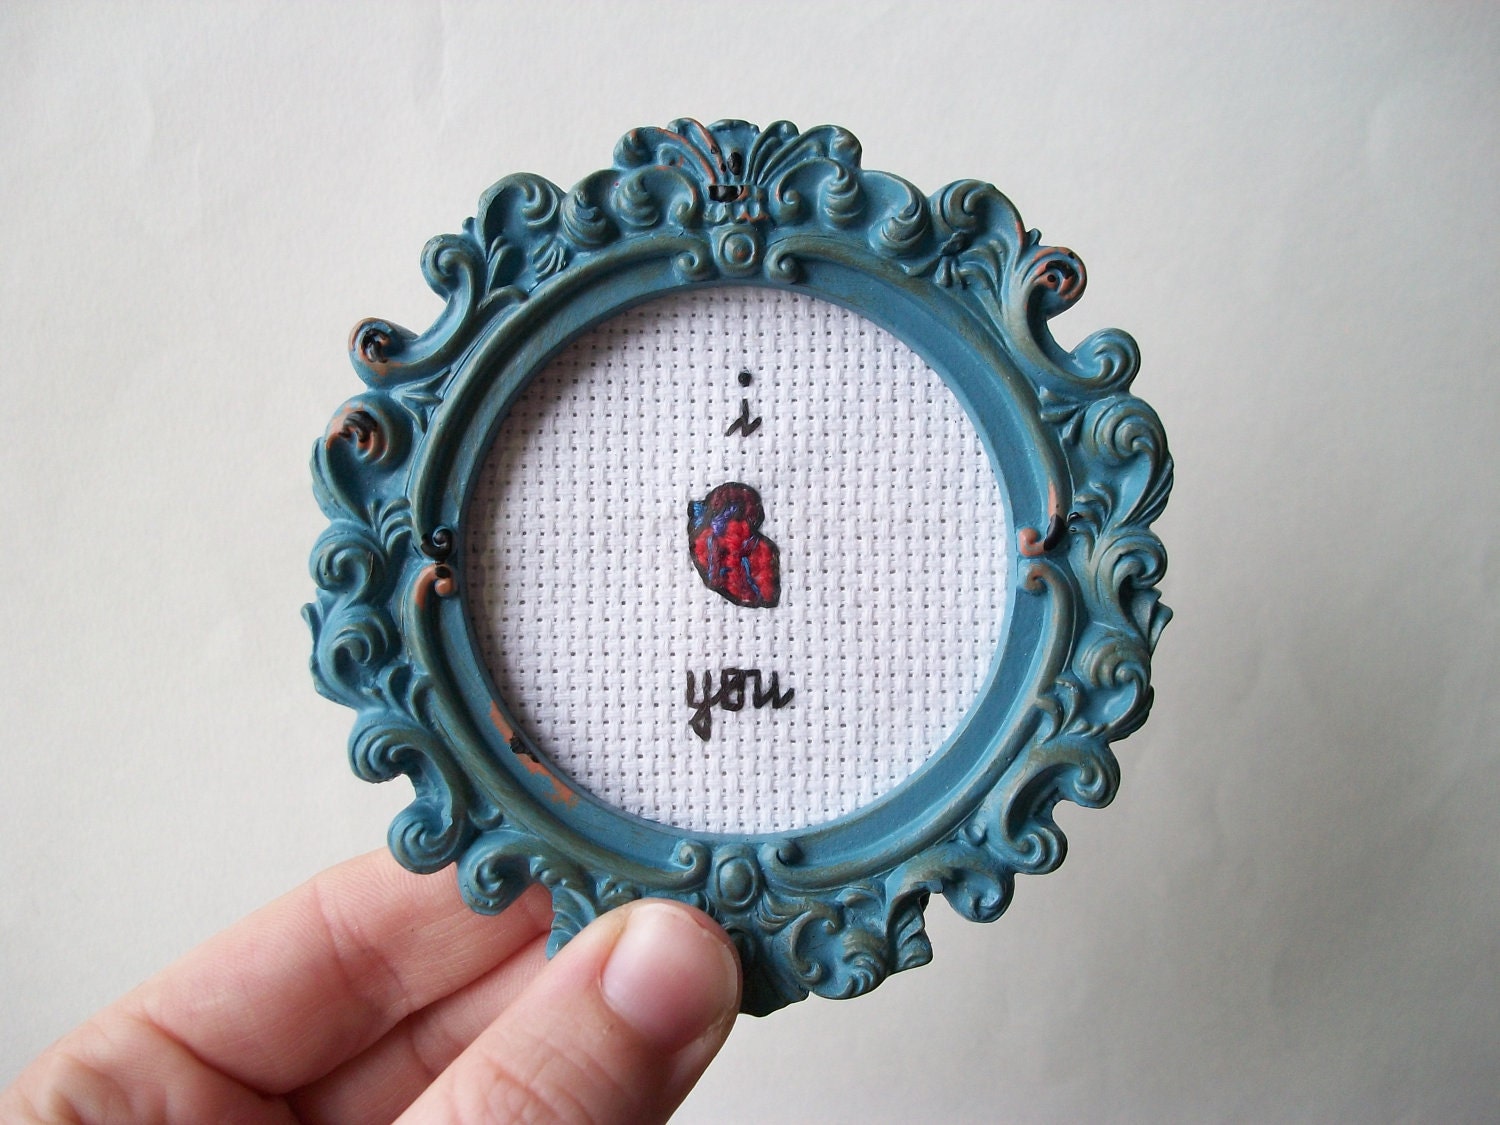 I heart you -- small cross stitch for your love, with anatomical heart in round frame, gift for him or her